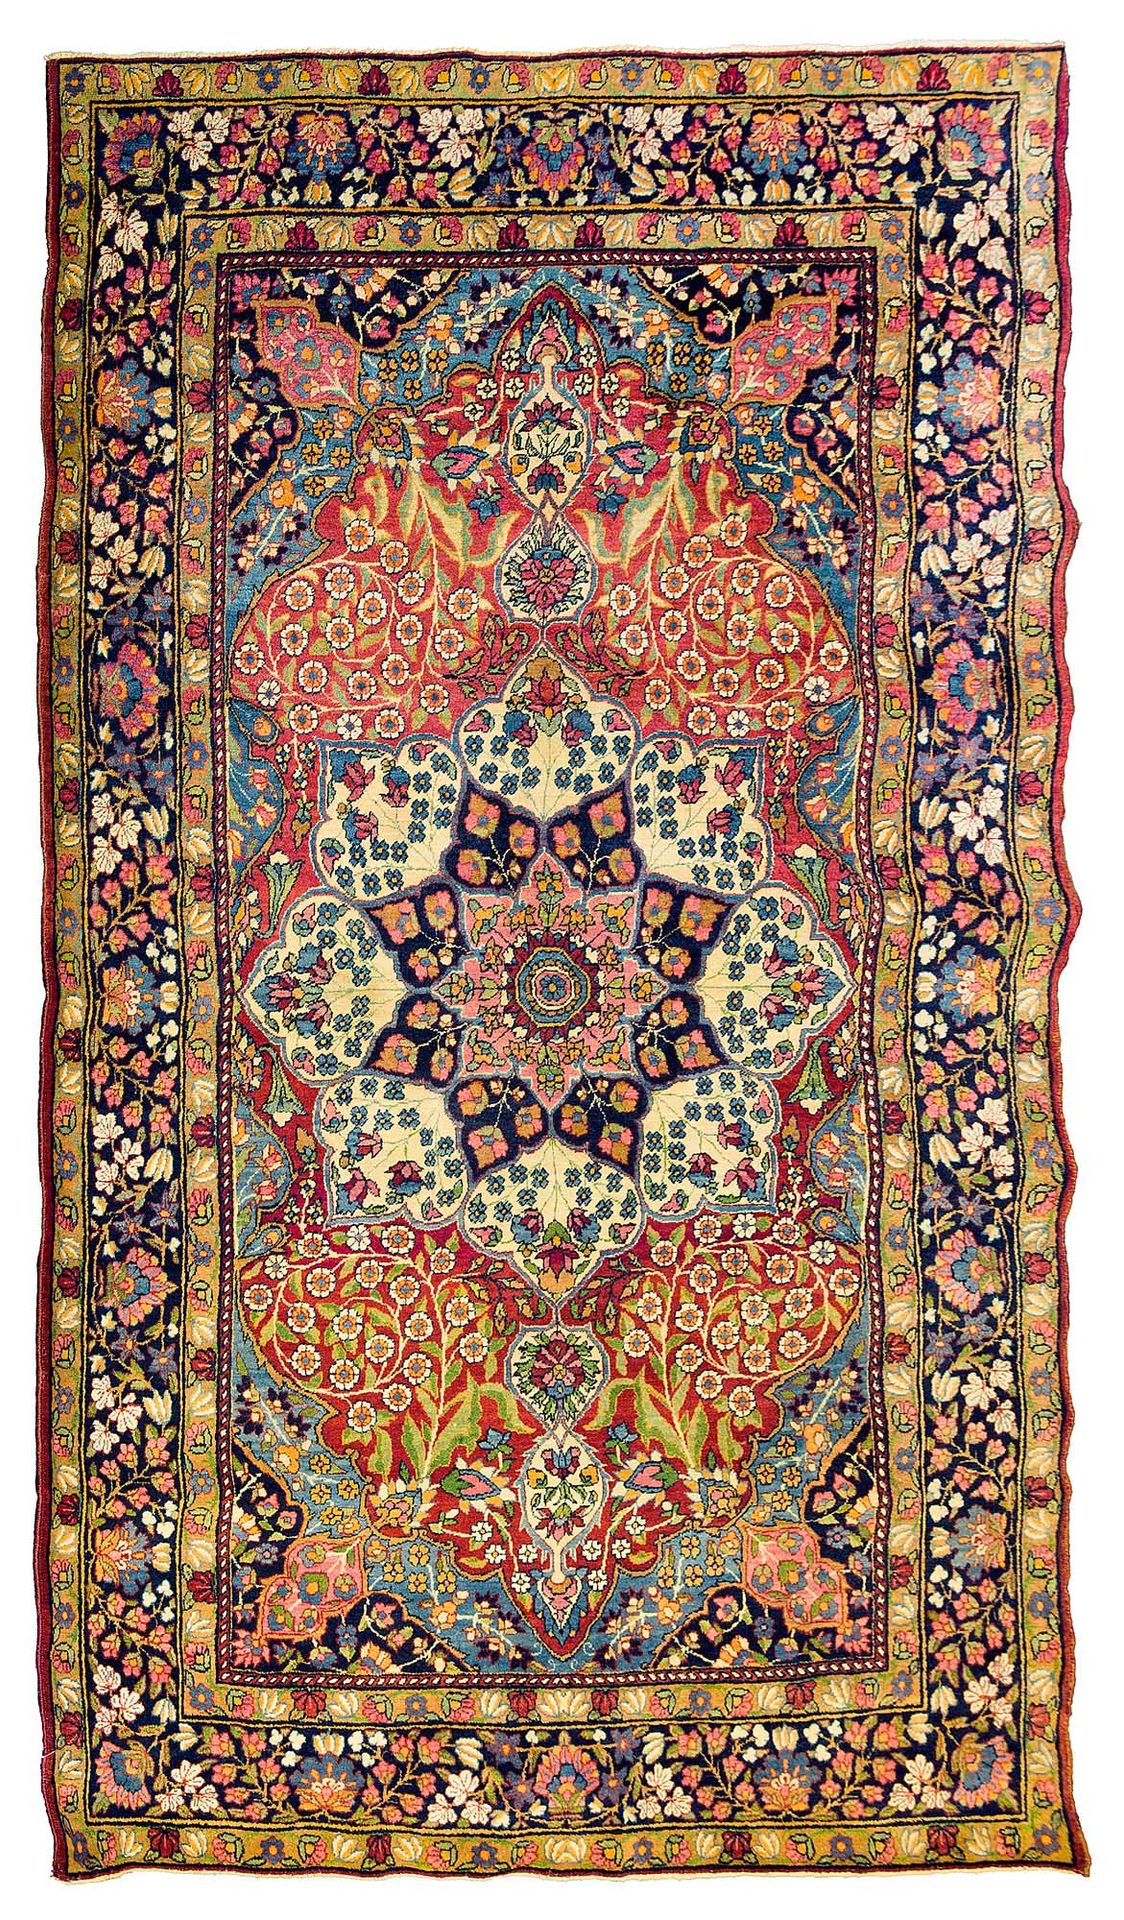 Null KIRMAN carpet (Persia), late 19th, early 20th century

Dimensions : 230 x 1&hellip;